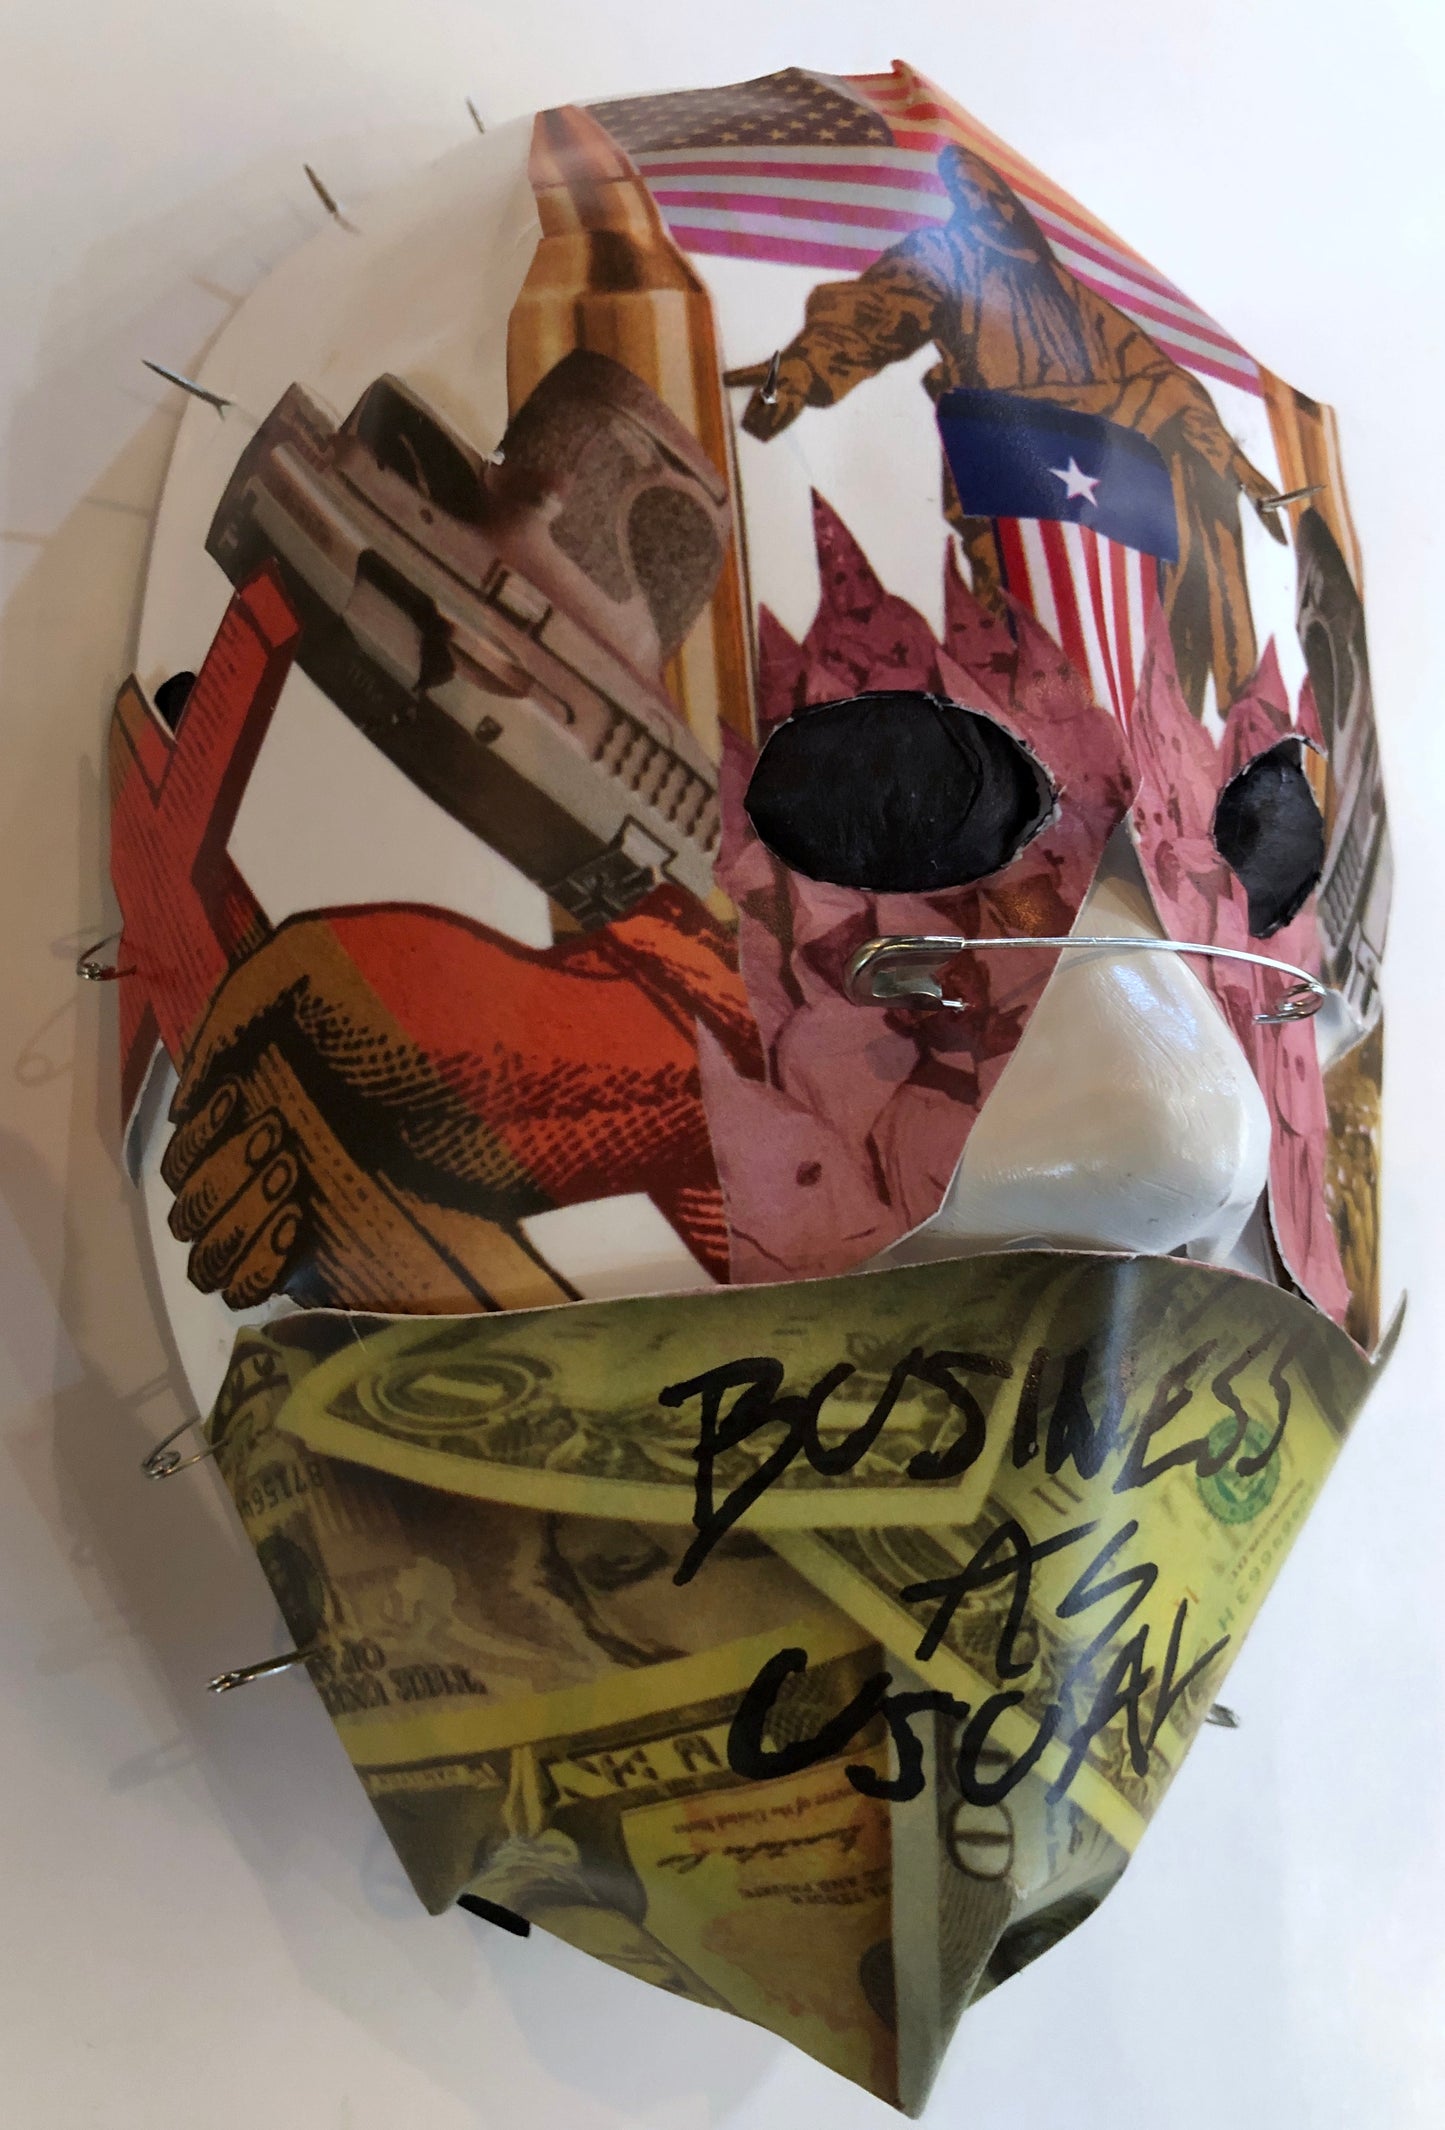 Sour Steve "Business As Usual" Mask (2022)